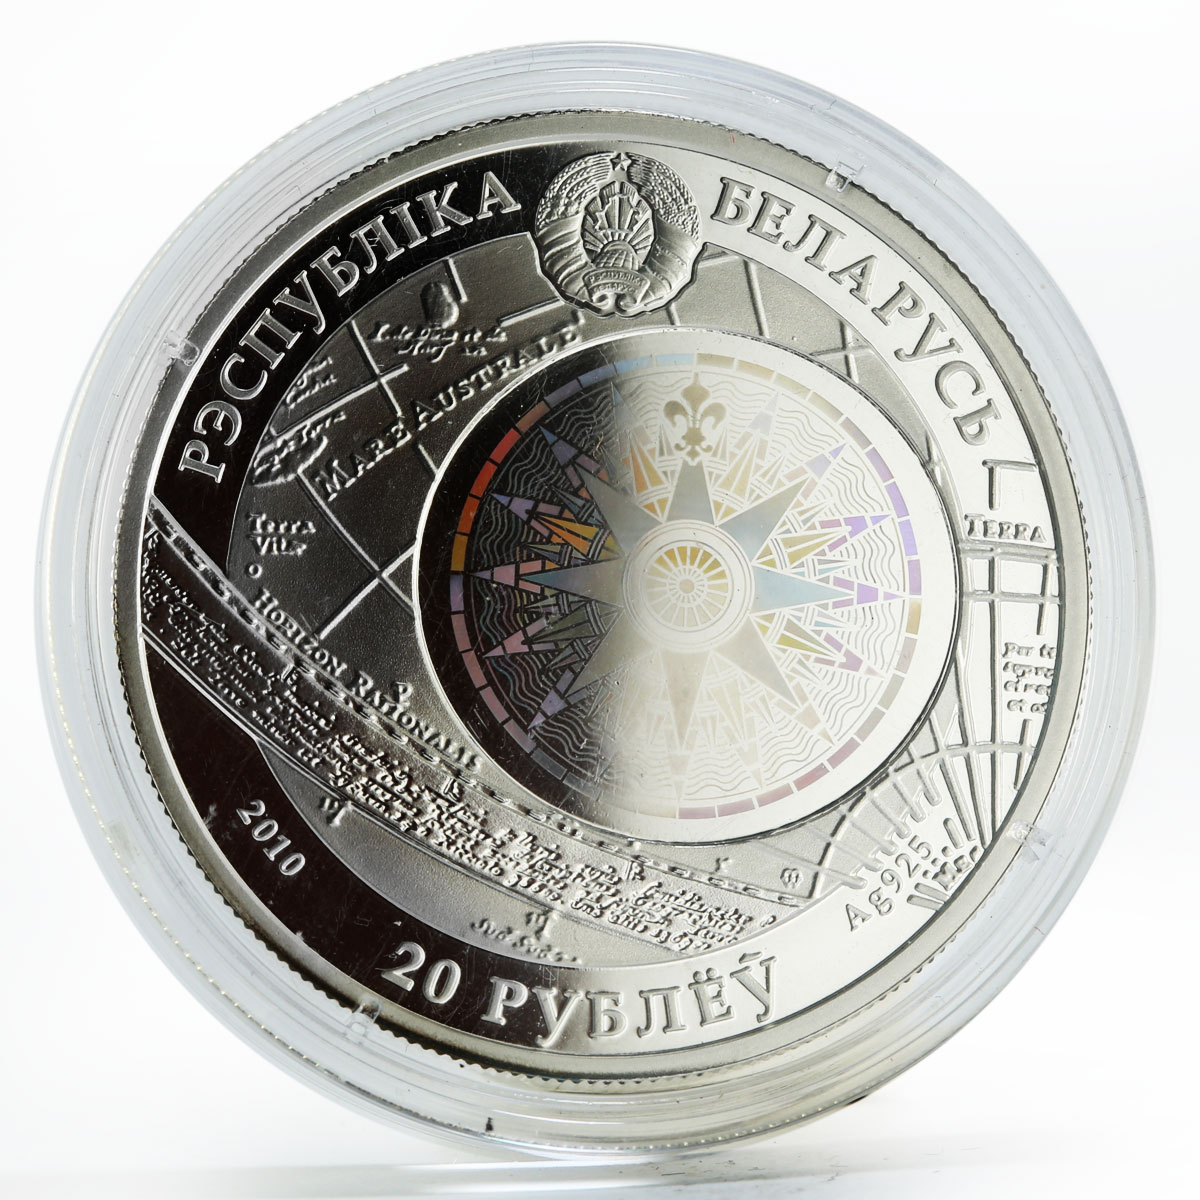 Belarus 20 rubles The Constitution ship proof silver coin 2010